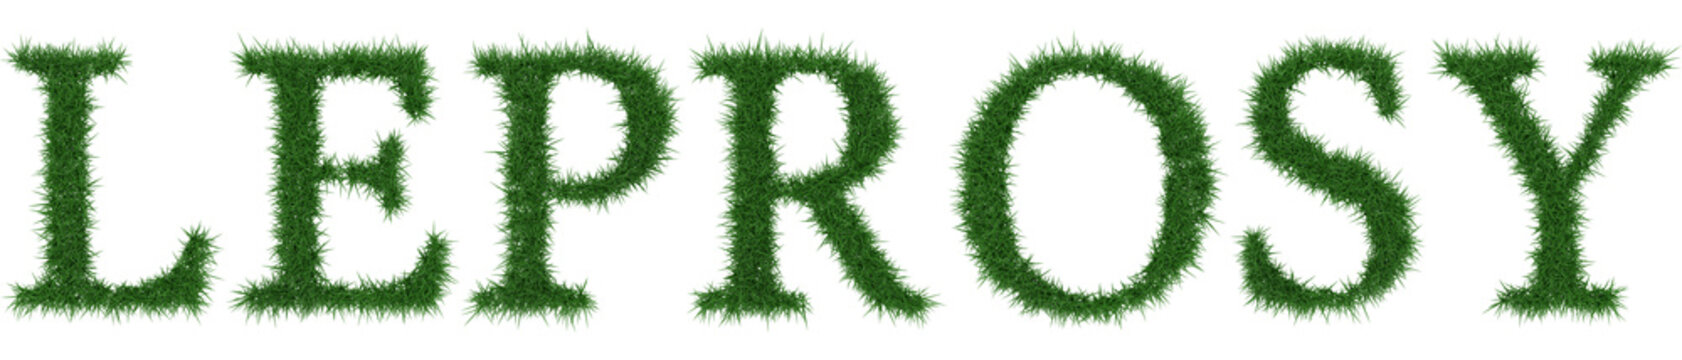 Leprosy - 3D rendering fresh Grass letters isolated on whhite background.